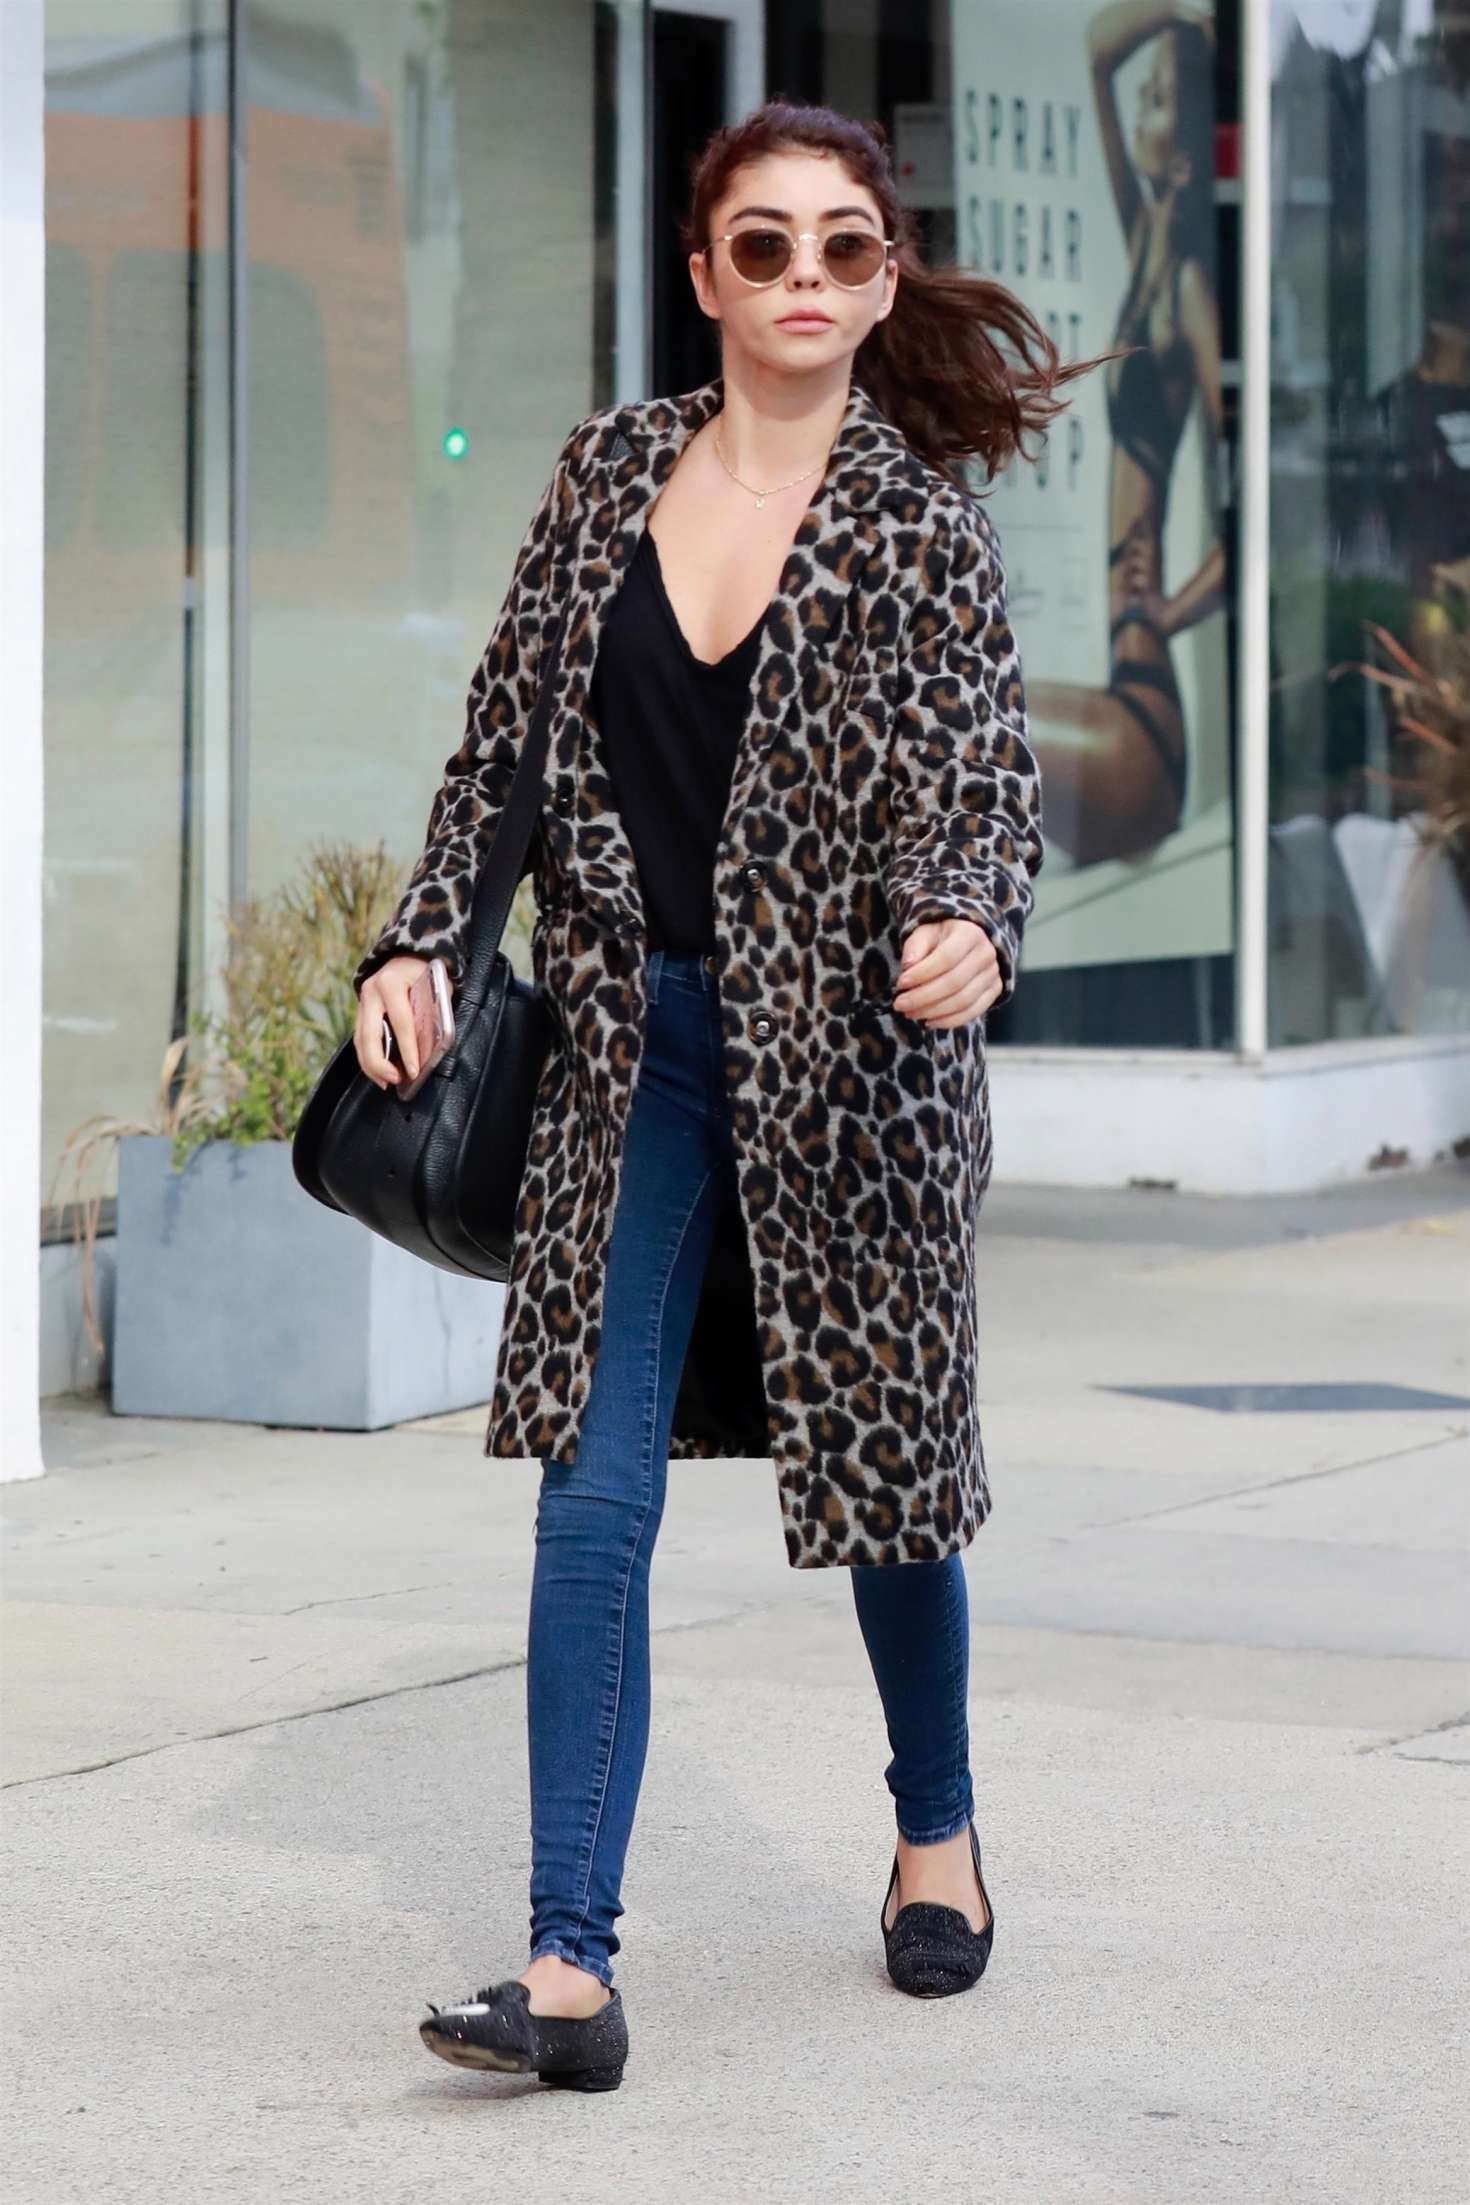 Sarah Hyland in Animal Print Coat â€“ Out in Los Angeles